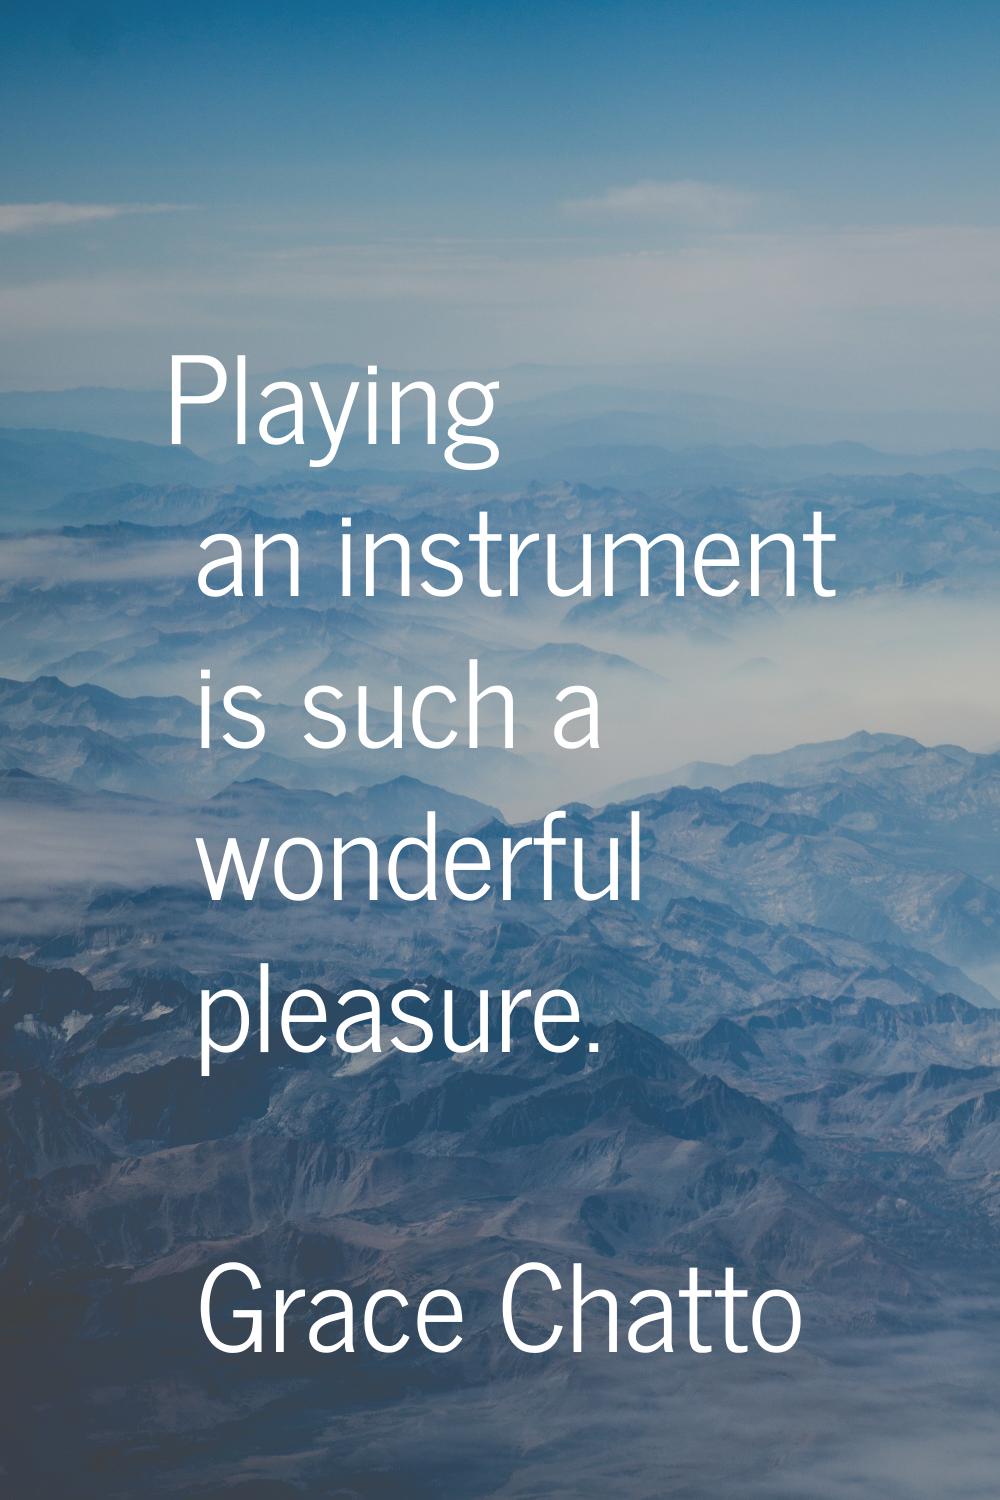 Playing an instrument is such a wonderful pleasure.